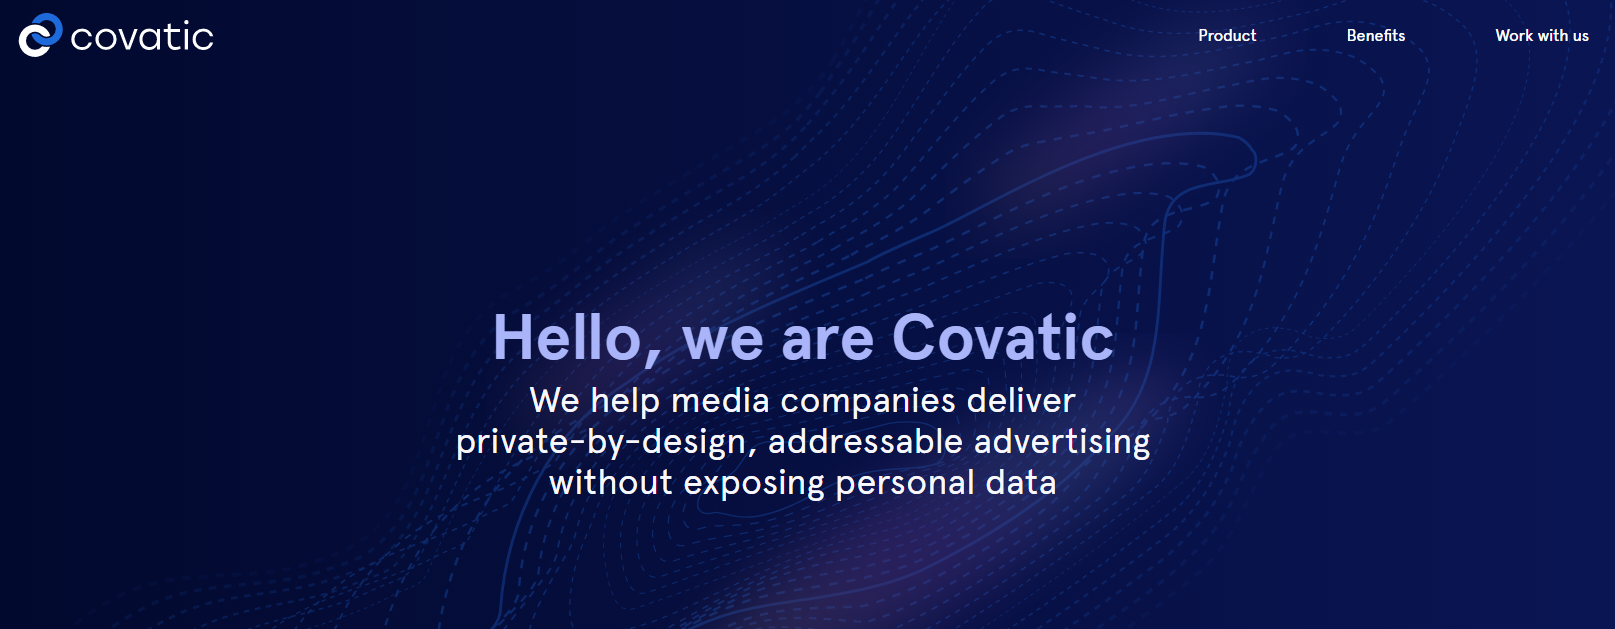 Covatic Secures $5 Million in Series A Funding to Revolutionize Addressable Advertising Technology.